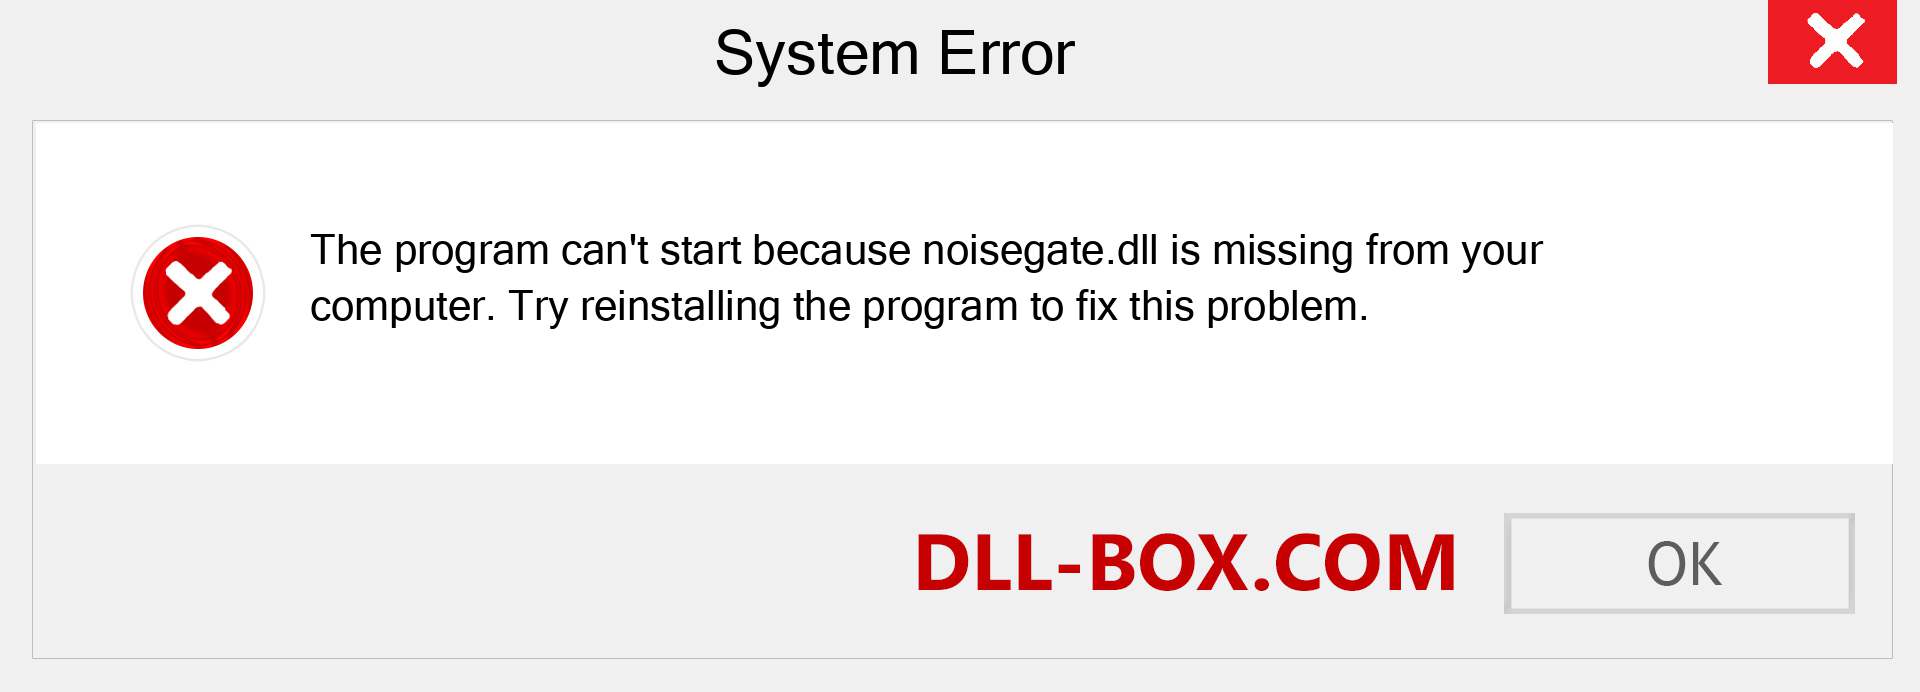  noisegate.dll file is missing?. Download for Windows 7, 8, 10 - Fix  noisegate dll Missing Error on Windows, photos, images